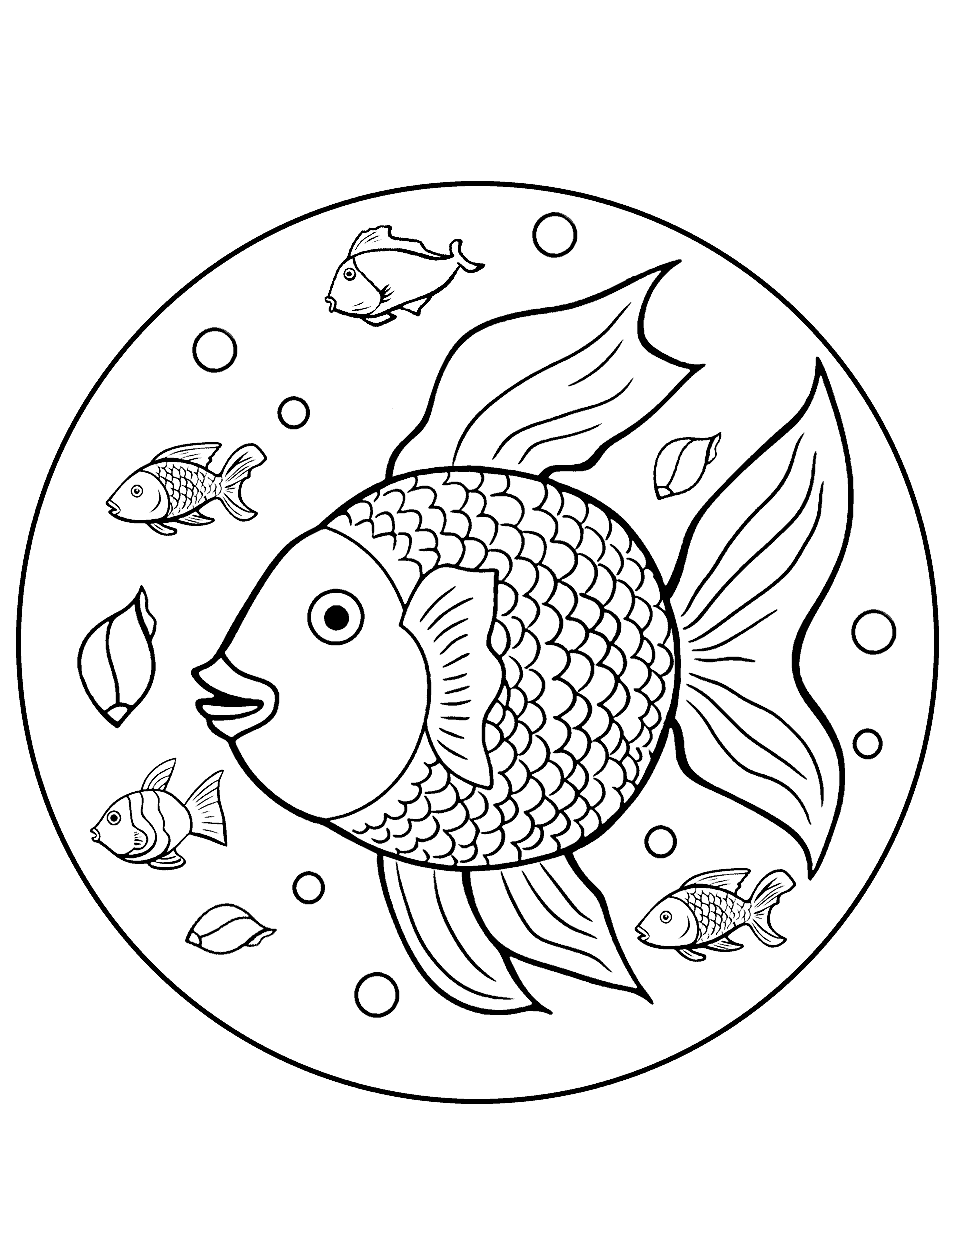 Marine Life in A Circle Fish Coloring Page - Different types of fish and marine elements inside a circle